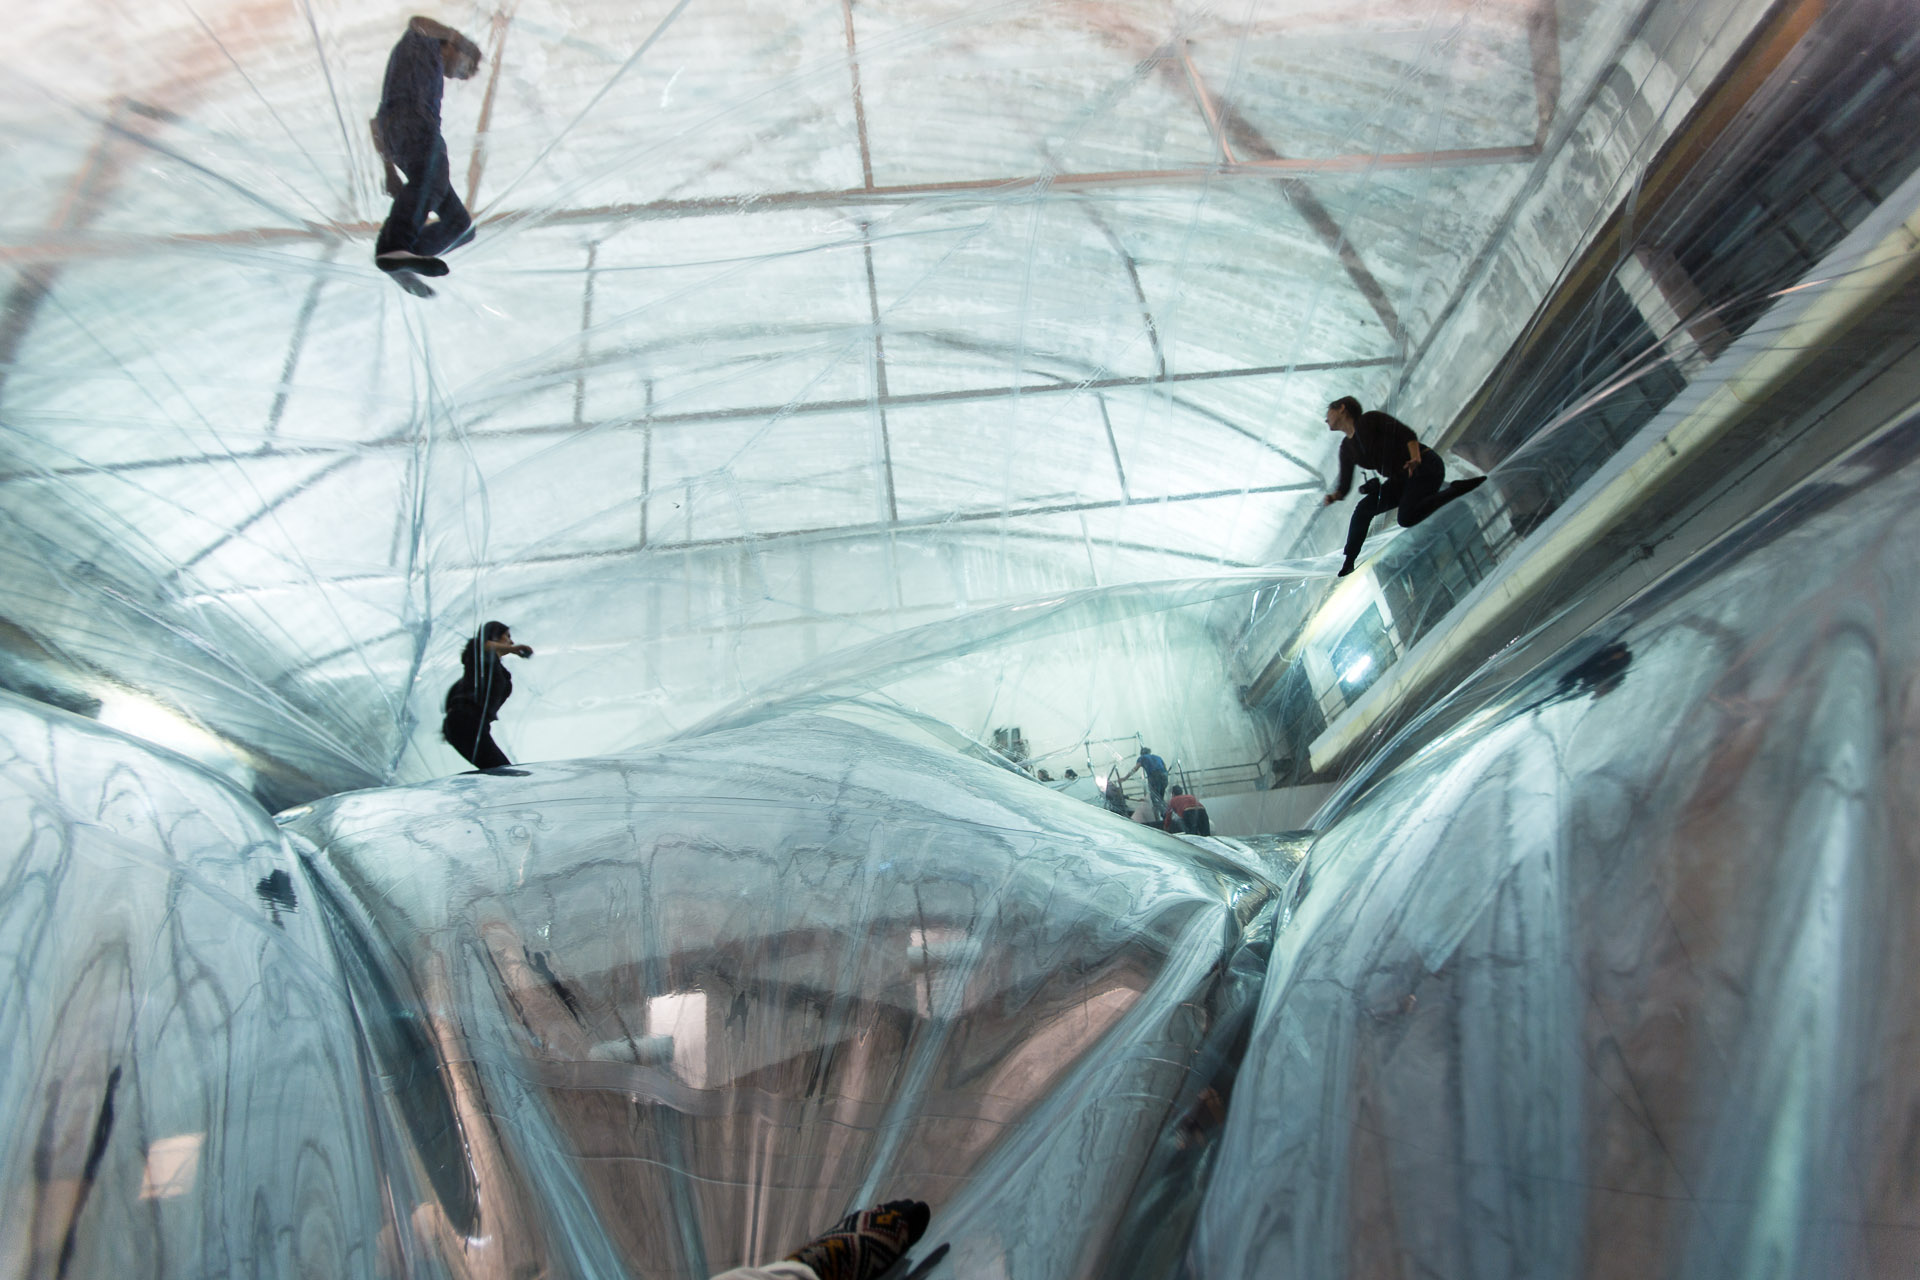 ON SPACE TIME FOAM by TOMAS SARACENO